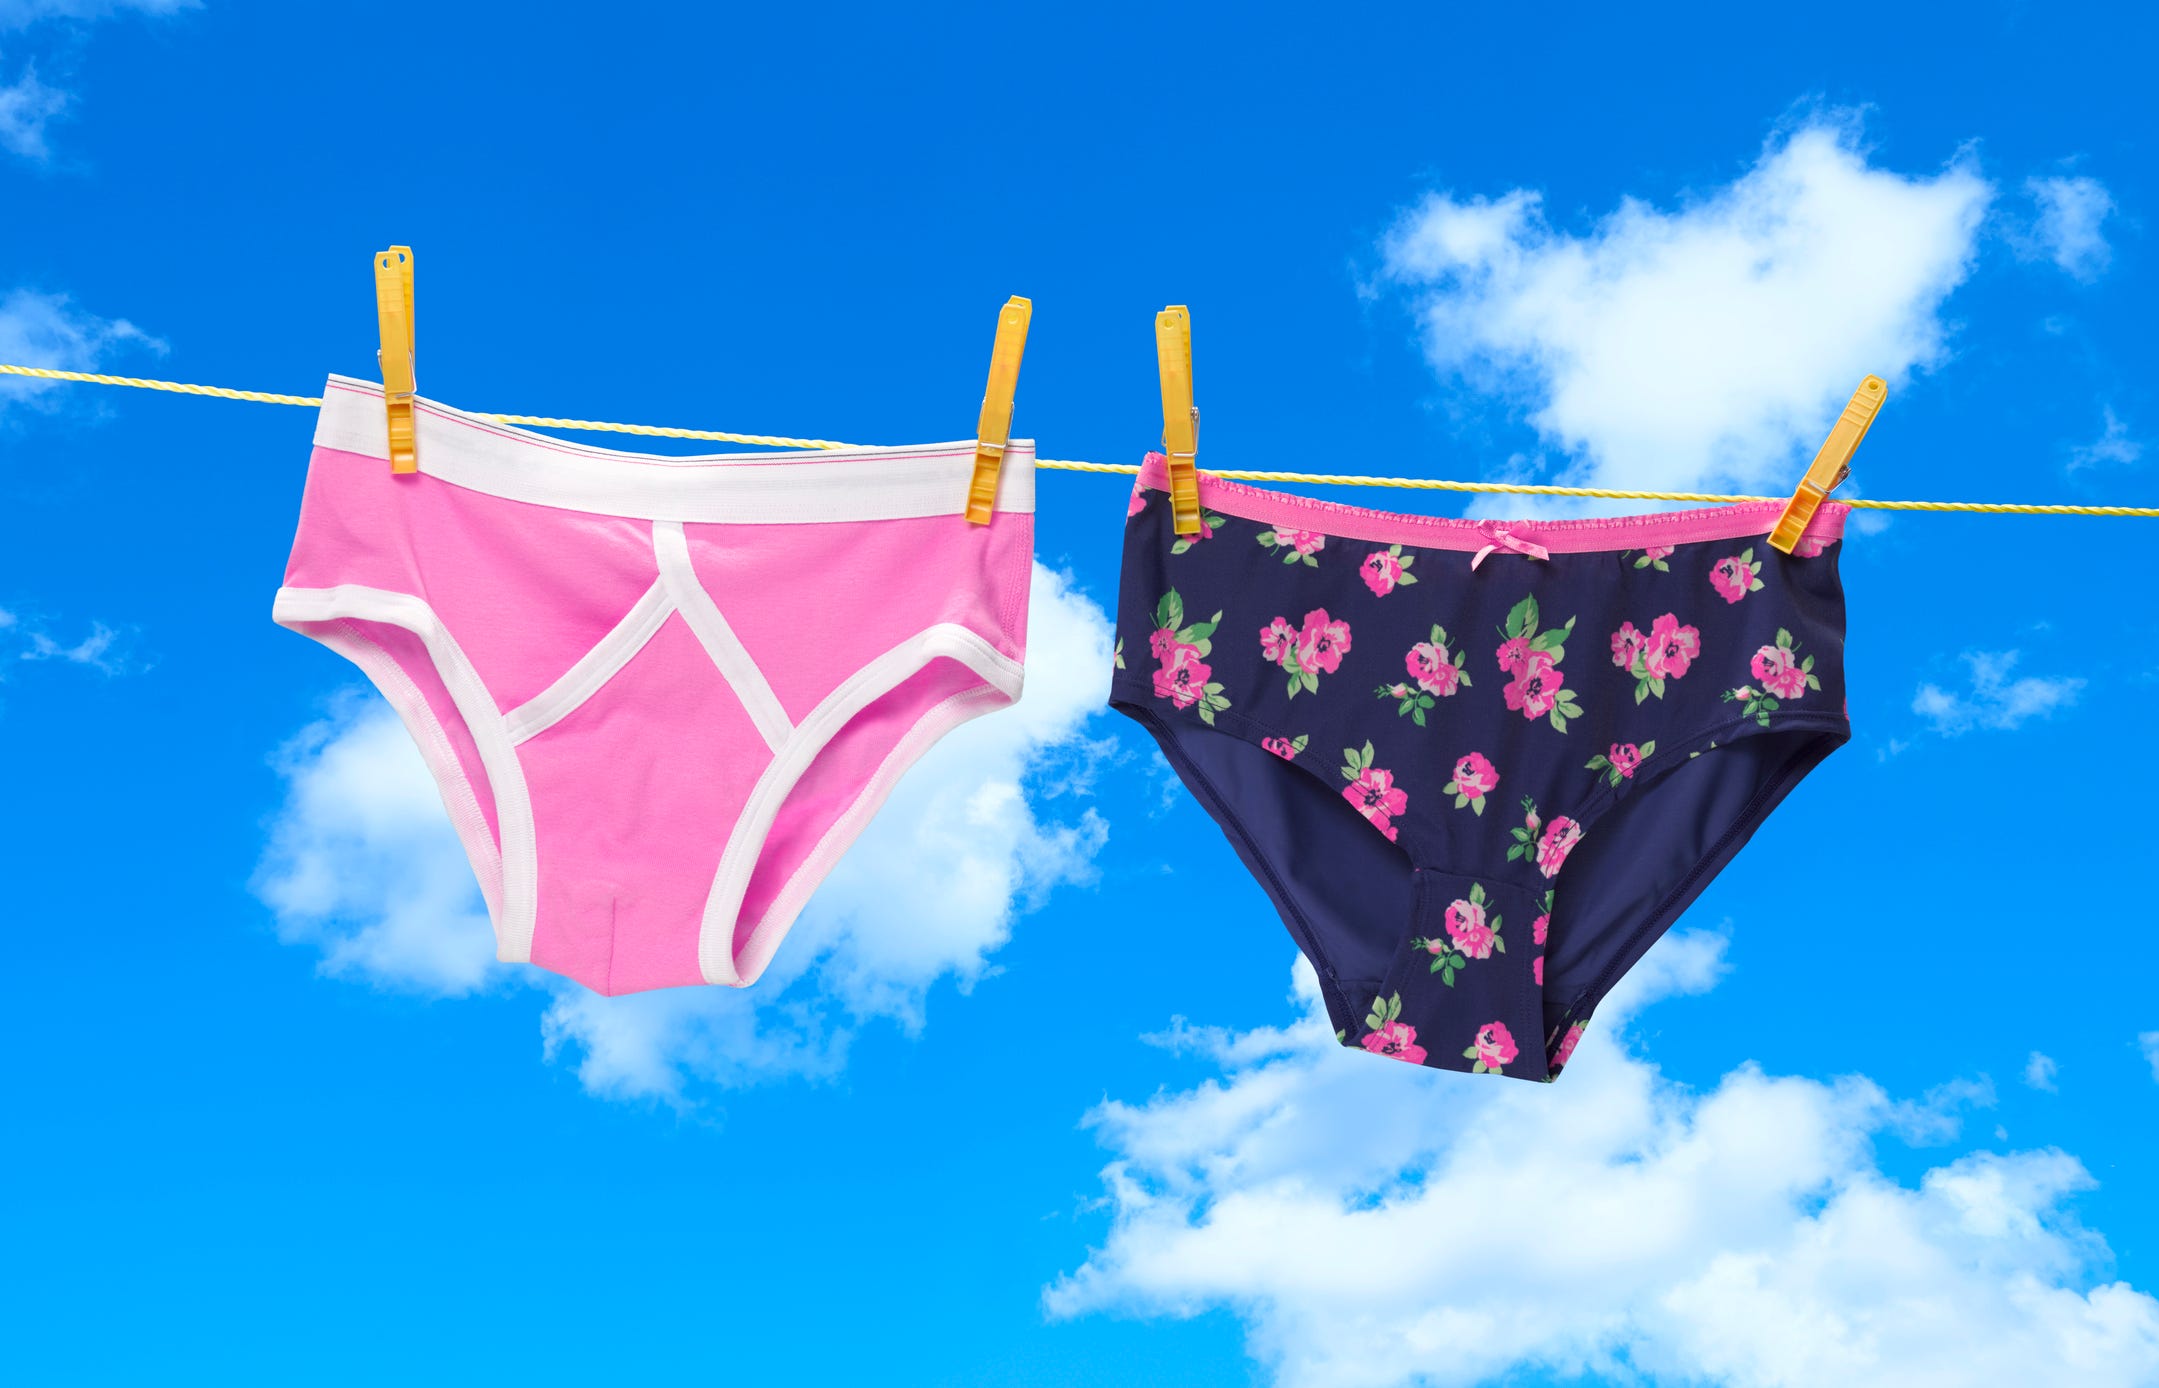 A gynecologist's guide on underwear hygiene for healthy vagina